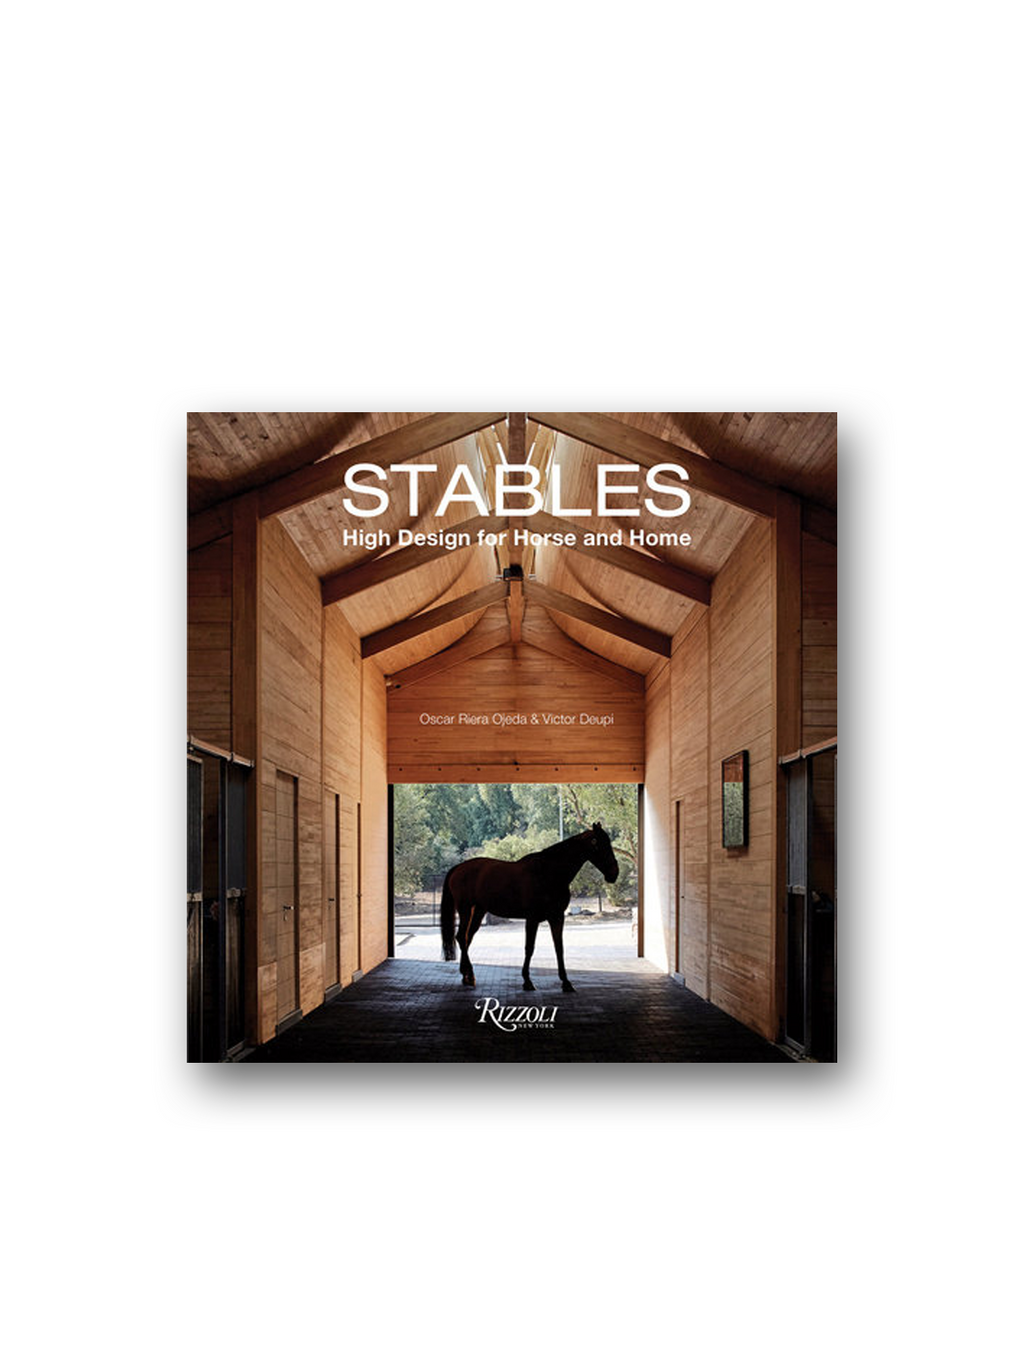 Stables: High Design for Horse and Home